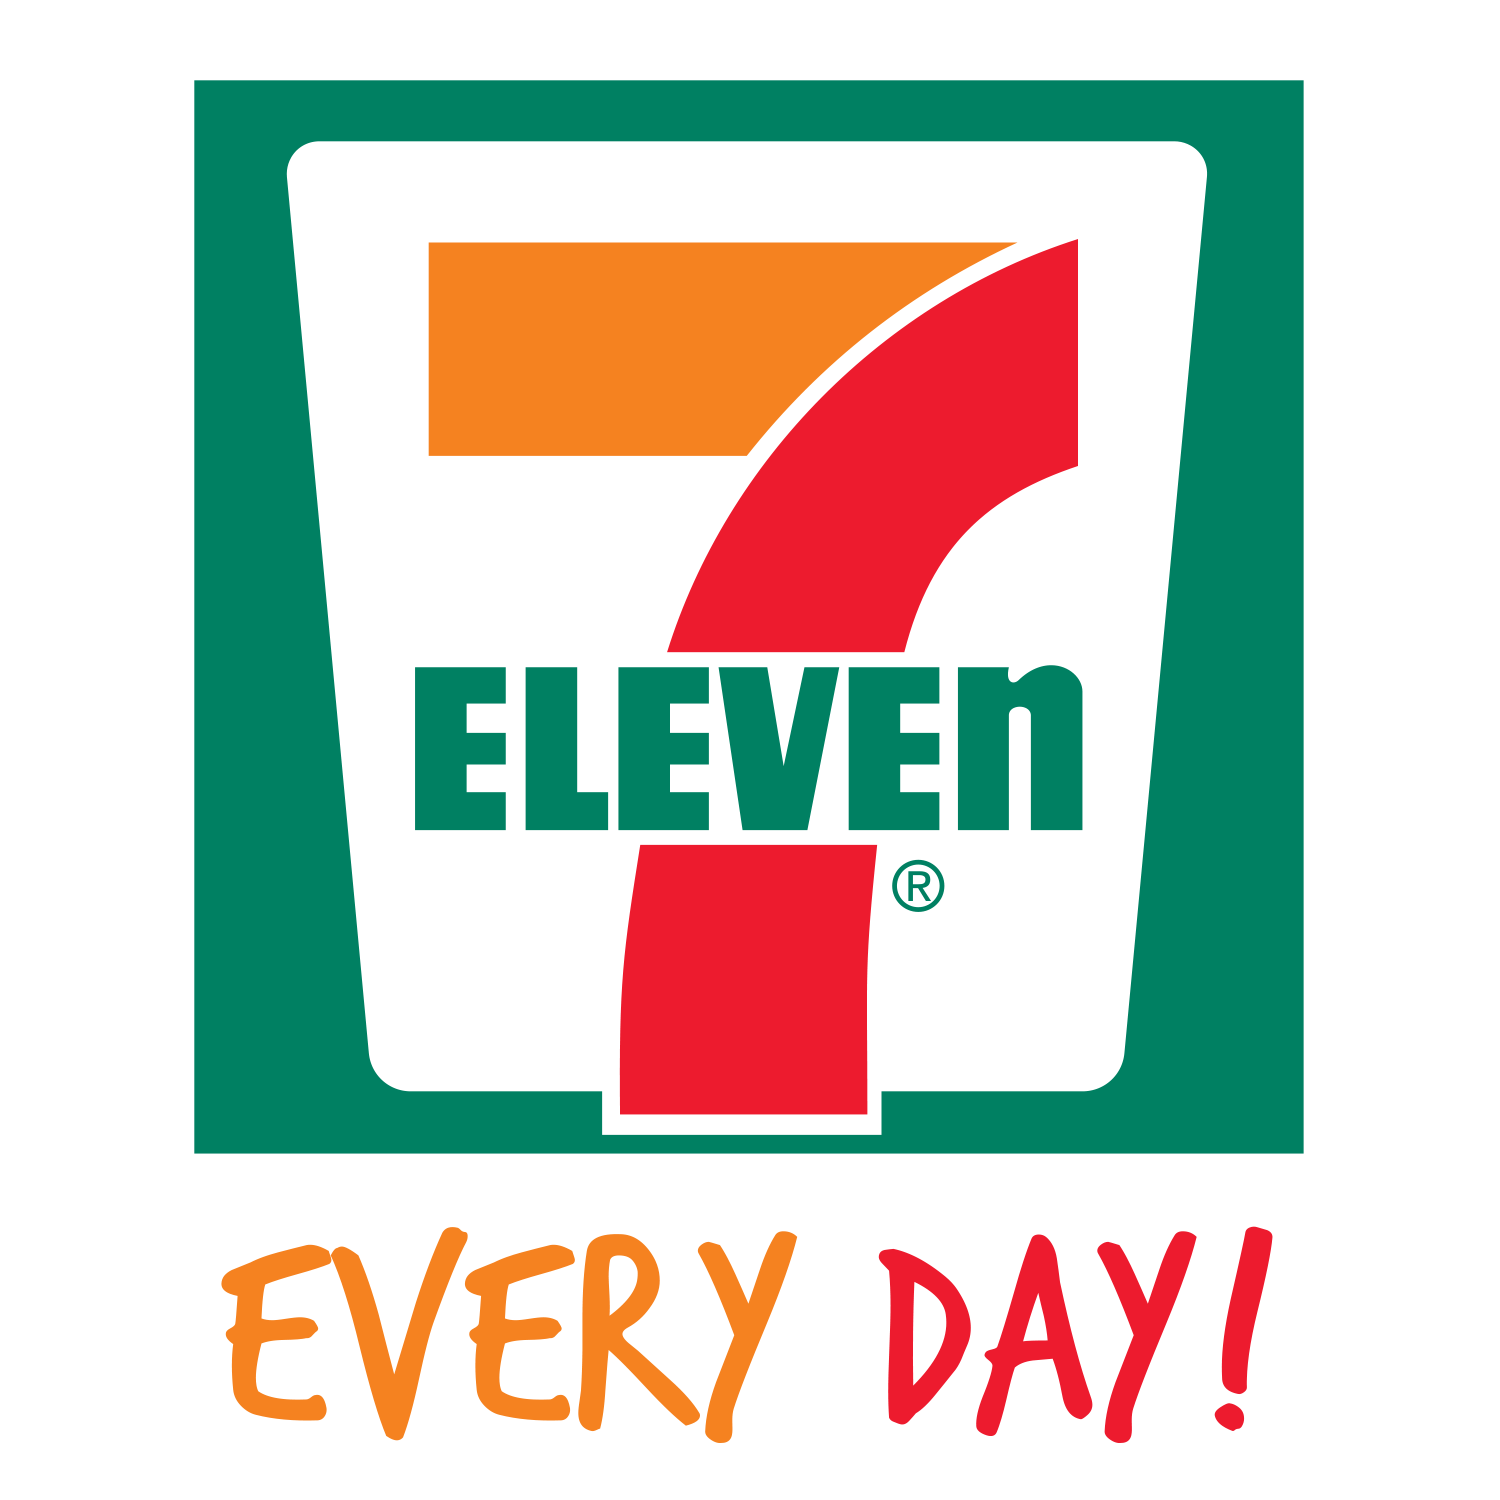 The Gift Certificate Voucher that Keeps on Giving - Rewards every day at 7-Eleven CLiQQ!'s Image